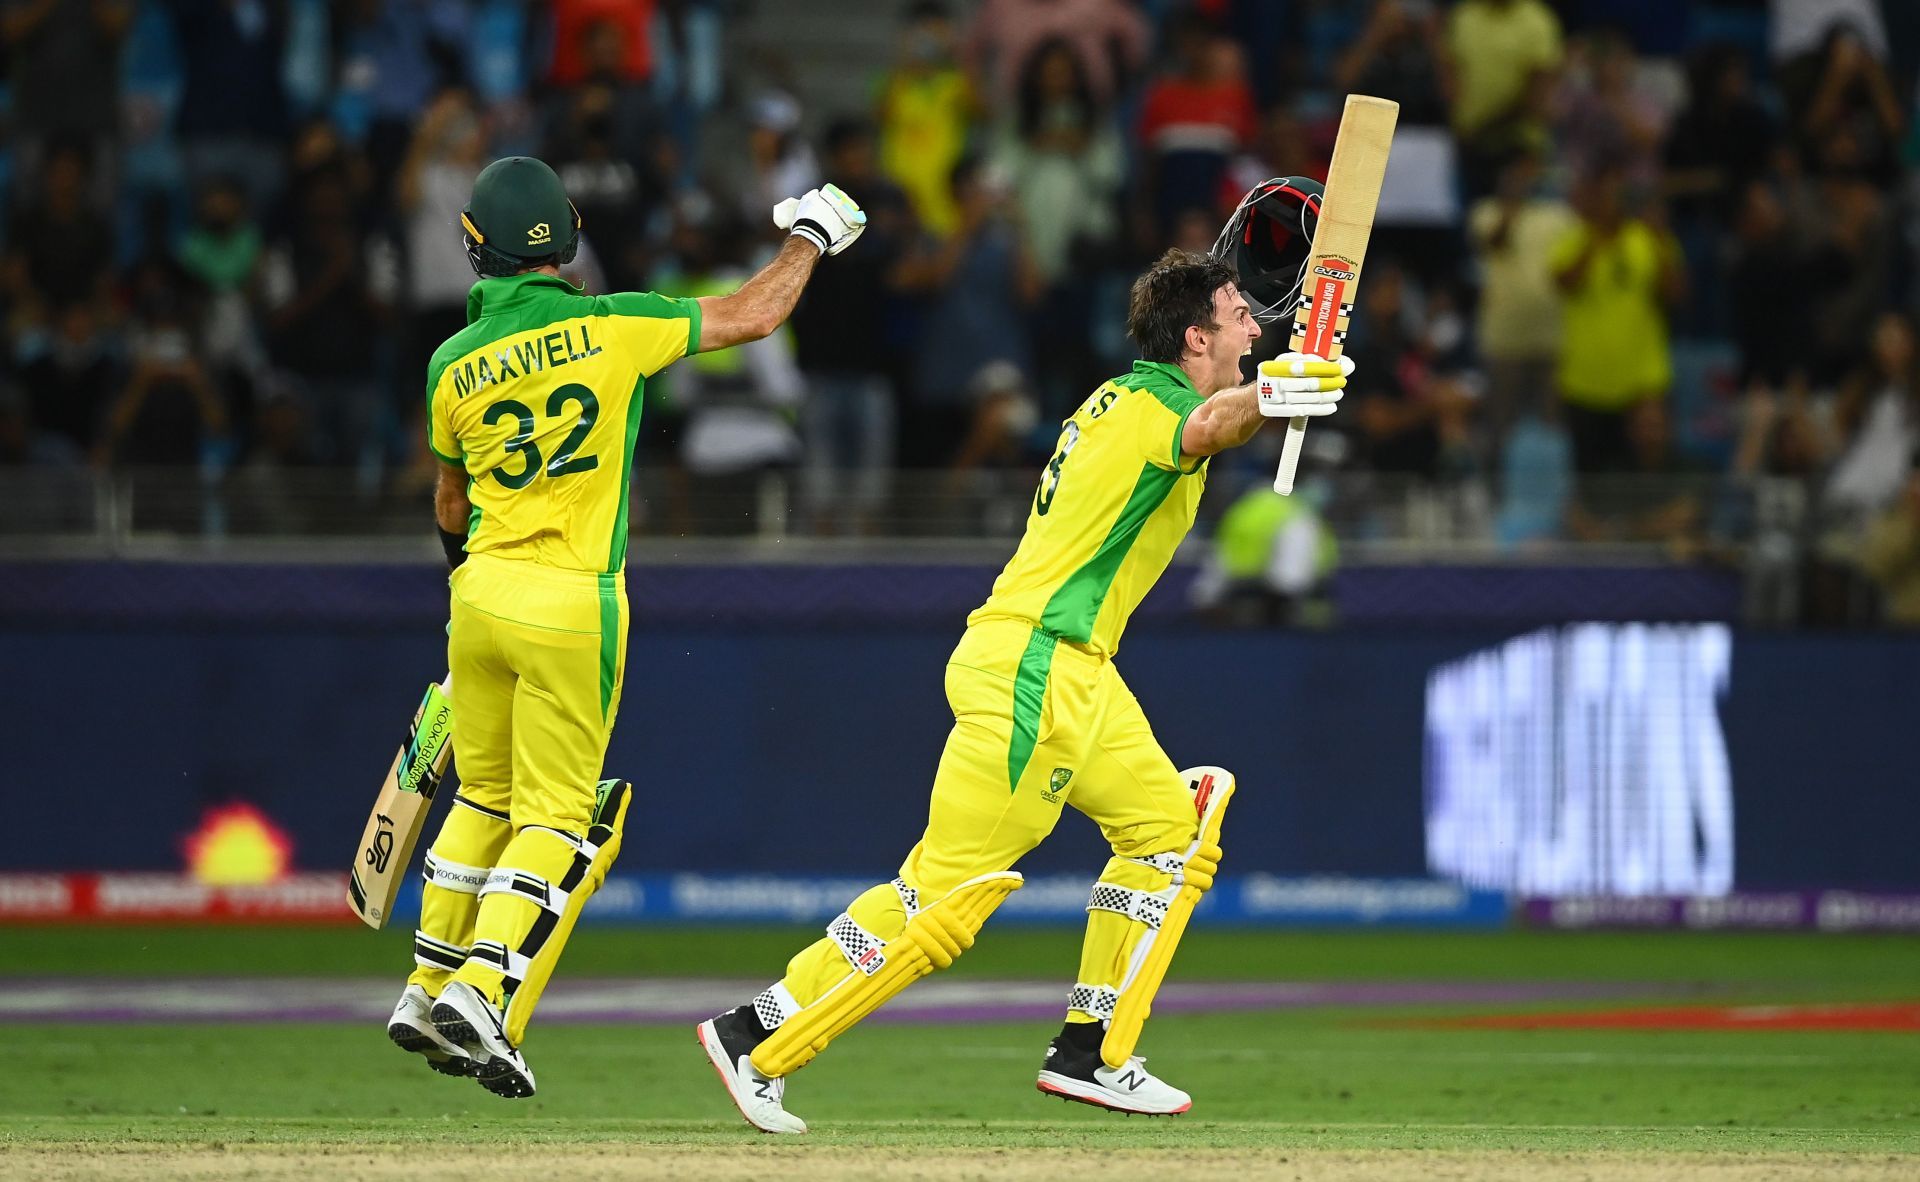 Mitchell Marsh remained unbeaten on 77 runs to guide Australia to their maiden T20 World Cup title (Credit: Getty Images)